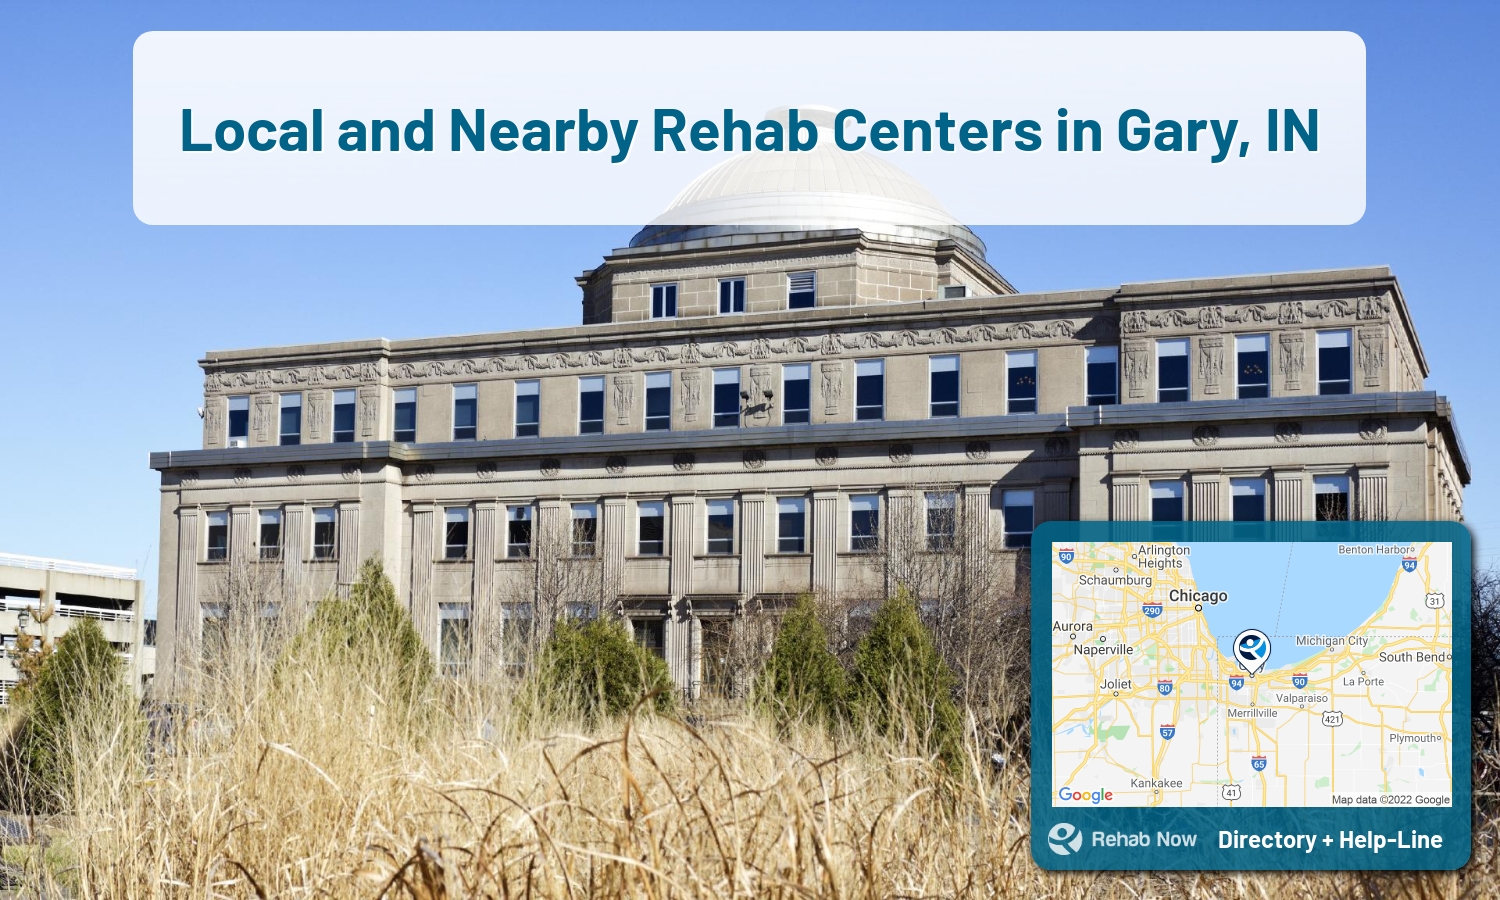 Ready to pick a rehab center in Gary? Get off alcohol, opiates, and other drugs, by selecting top drug rehab centers in Indiana